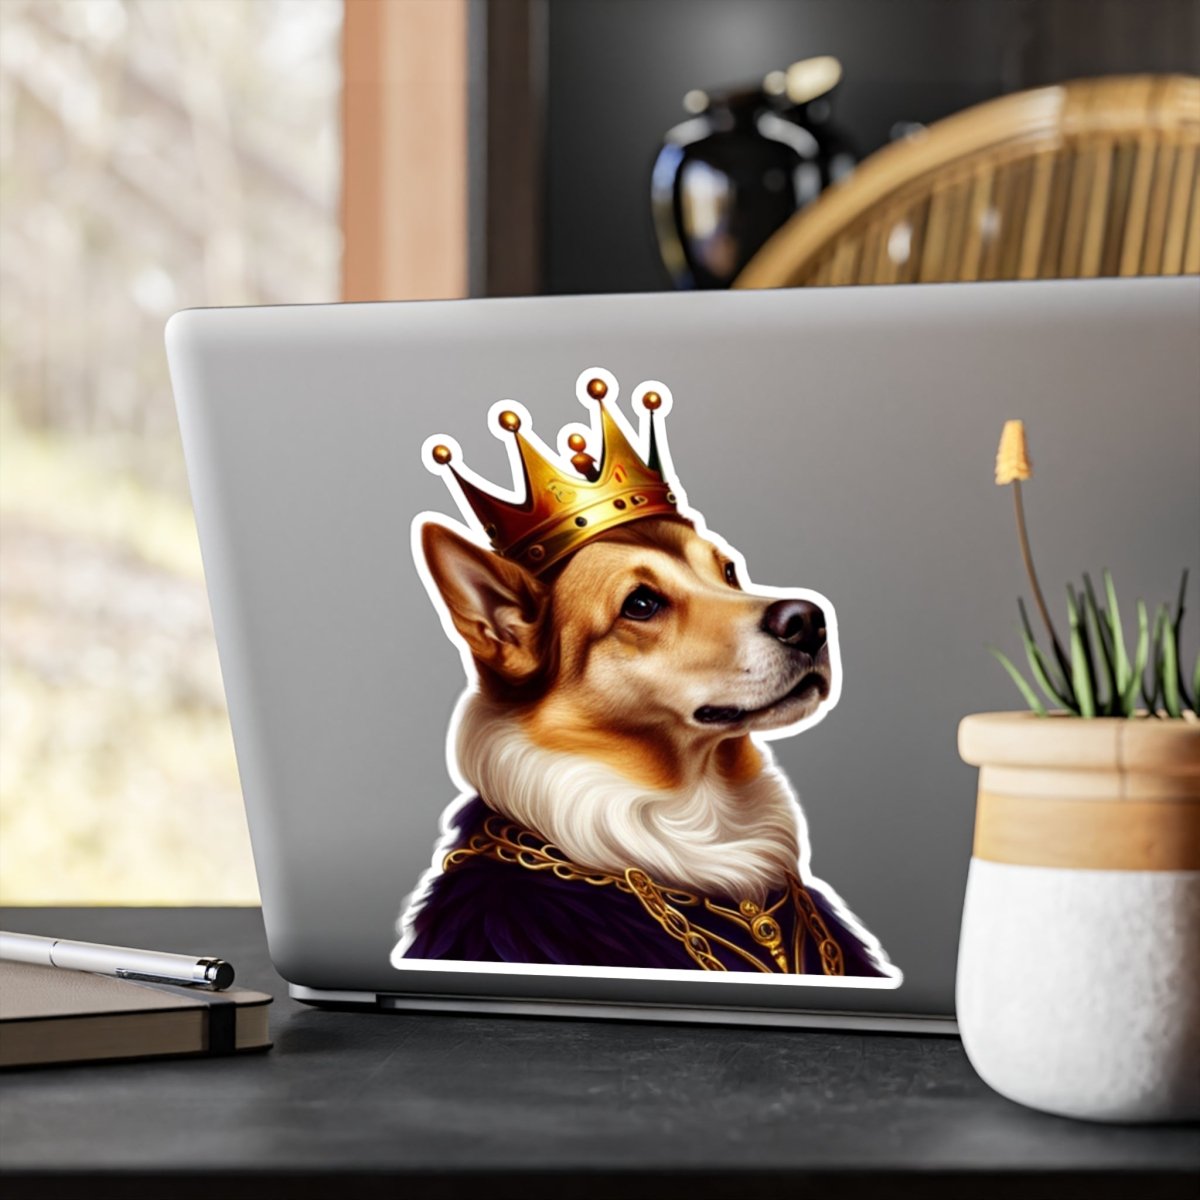 Royal Dog Vinyl Decal - Style C Outlined - DarzyStore